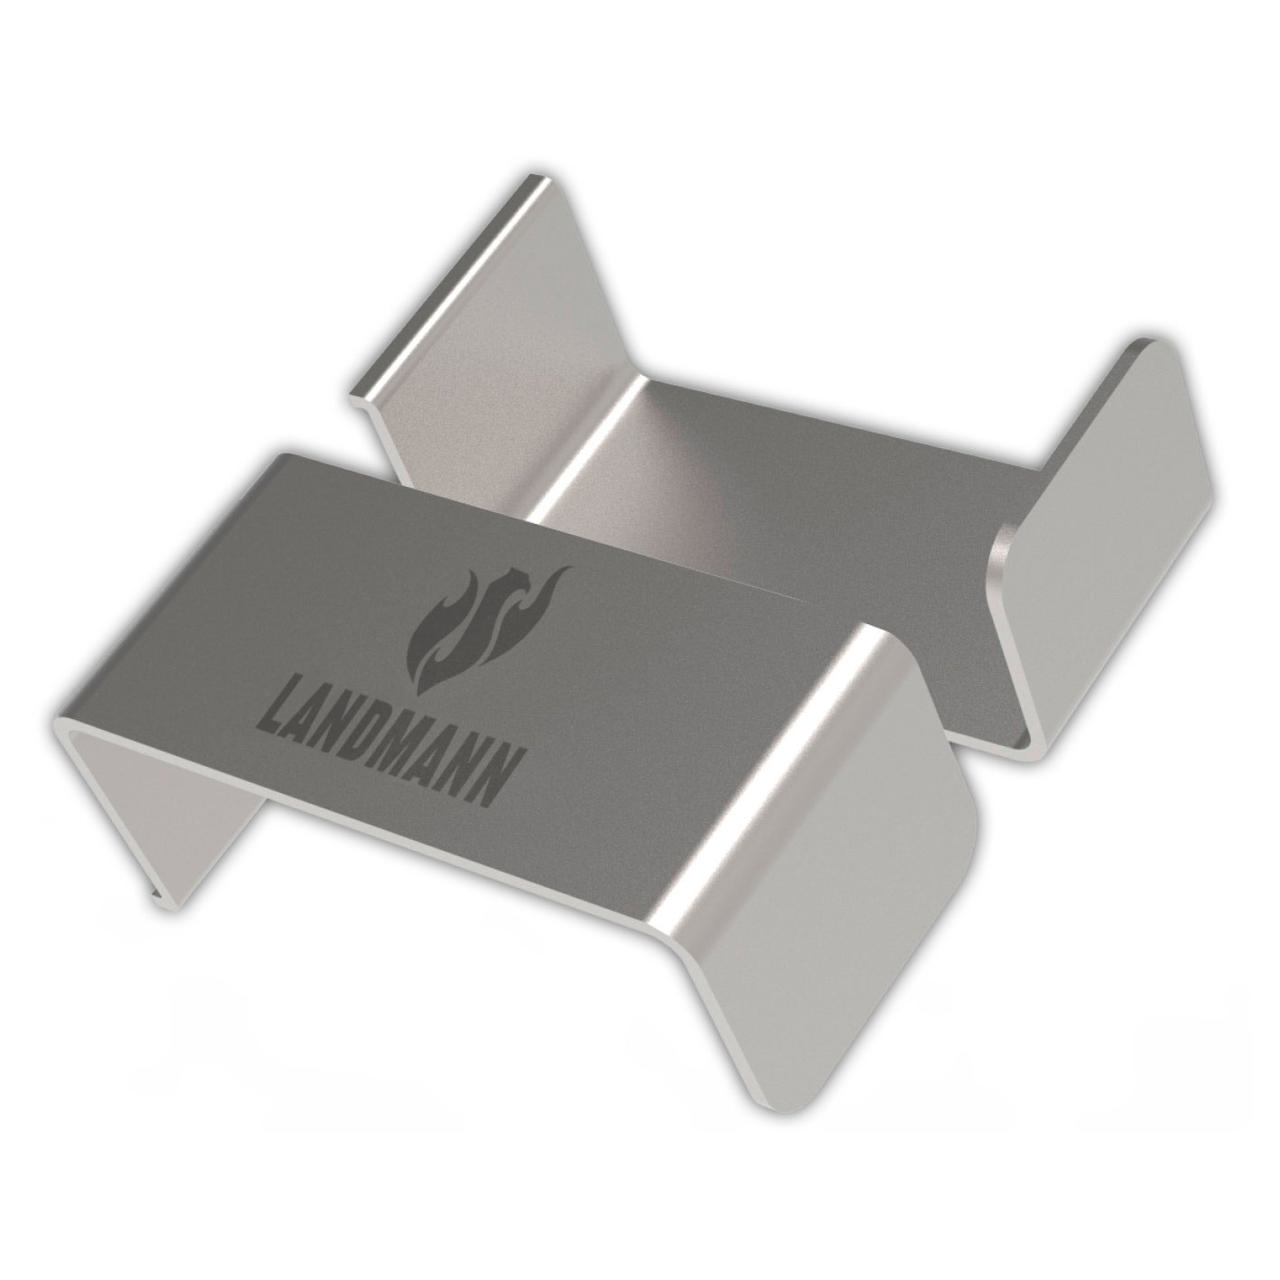 LANDMANN STAINLESS STEEL PAPER ROLL HOLDER WITH MAGNET SILVER